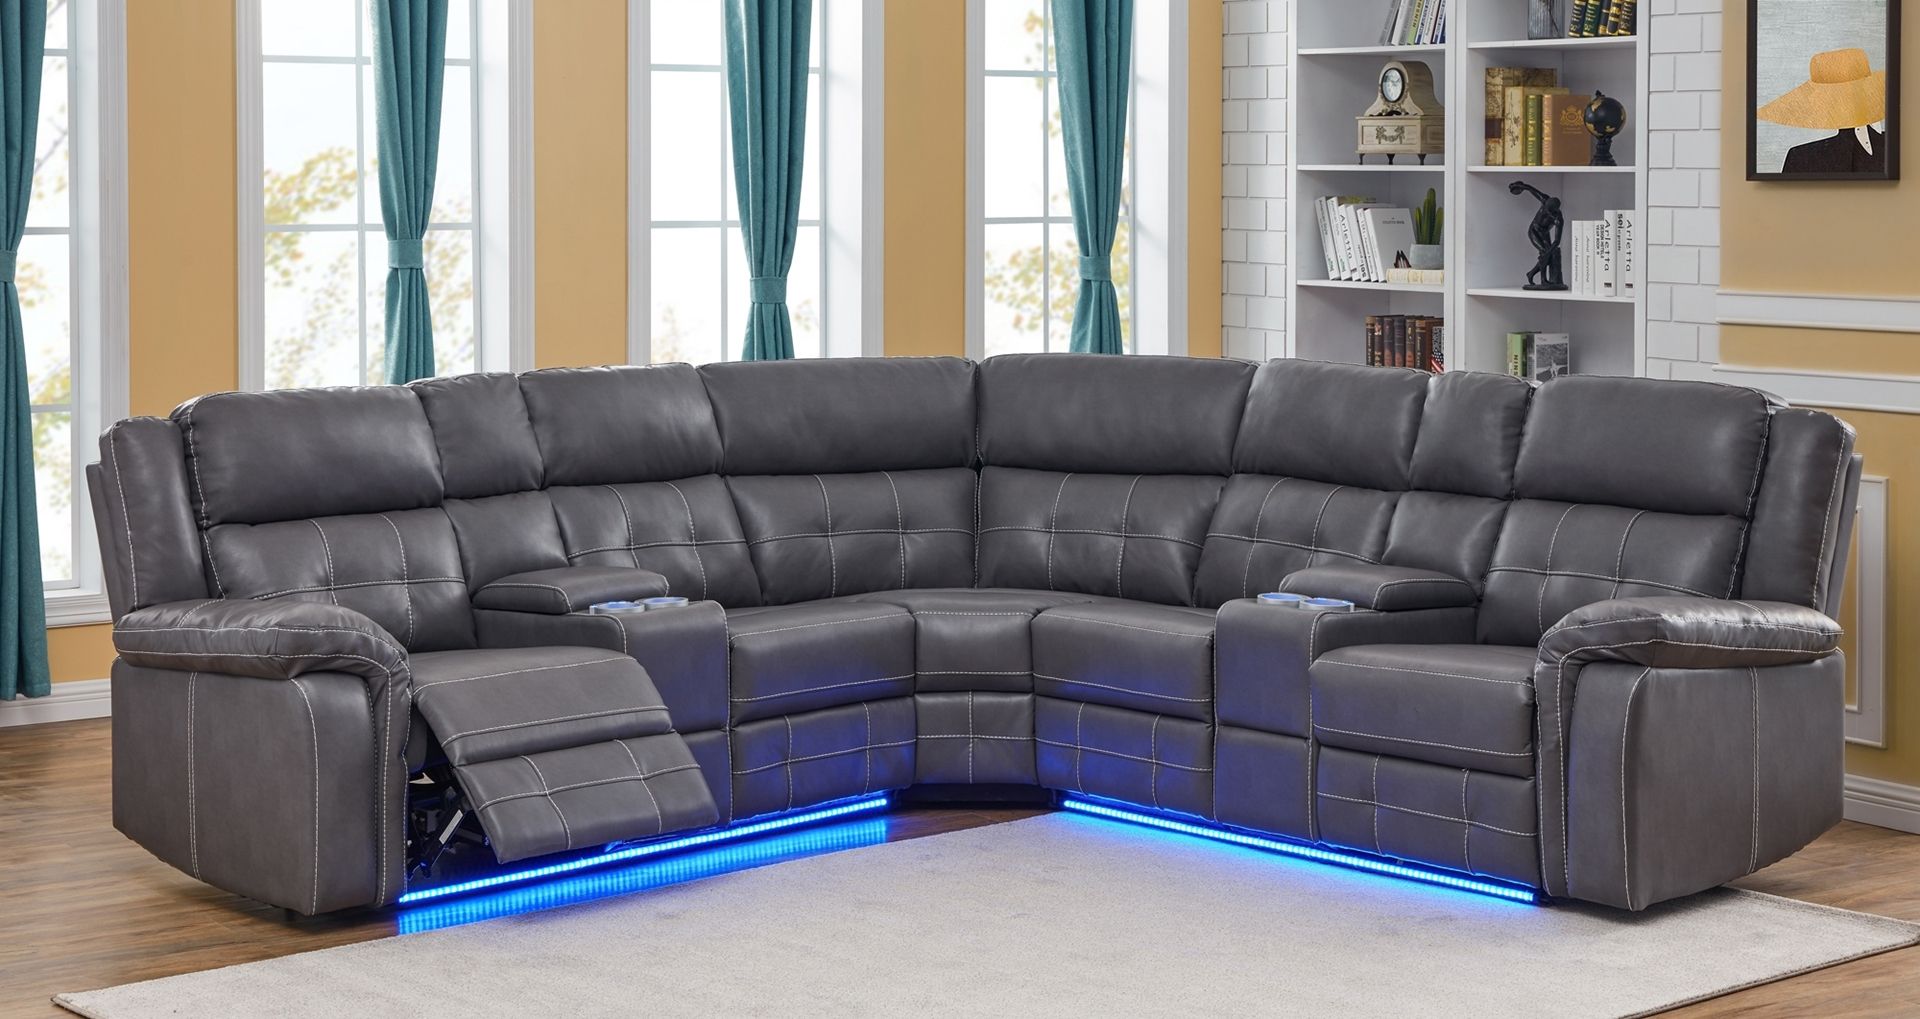 Cobalt Power/Manual Reclining Sectional Sofa With Led Within Raven Power Reclining Sofas (View 15 of 15)